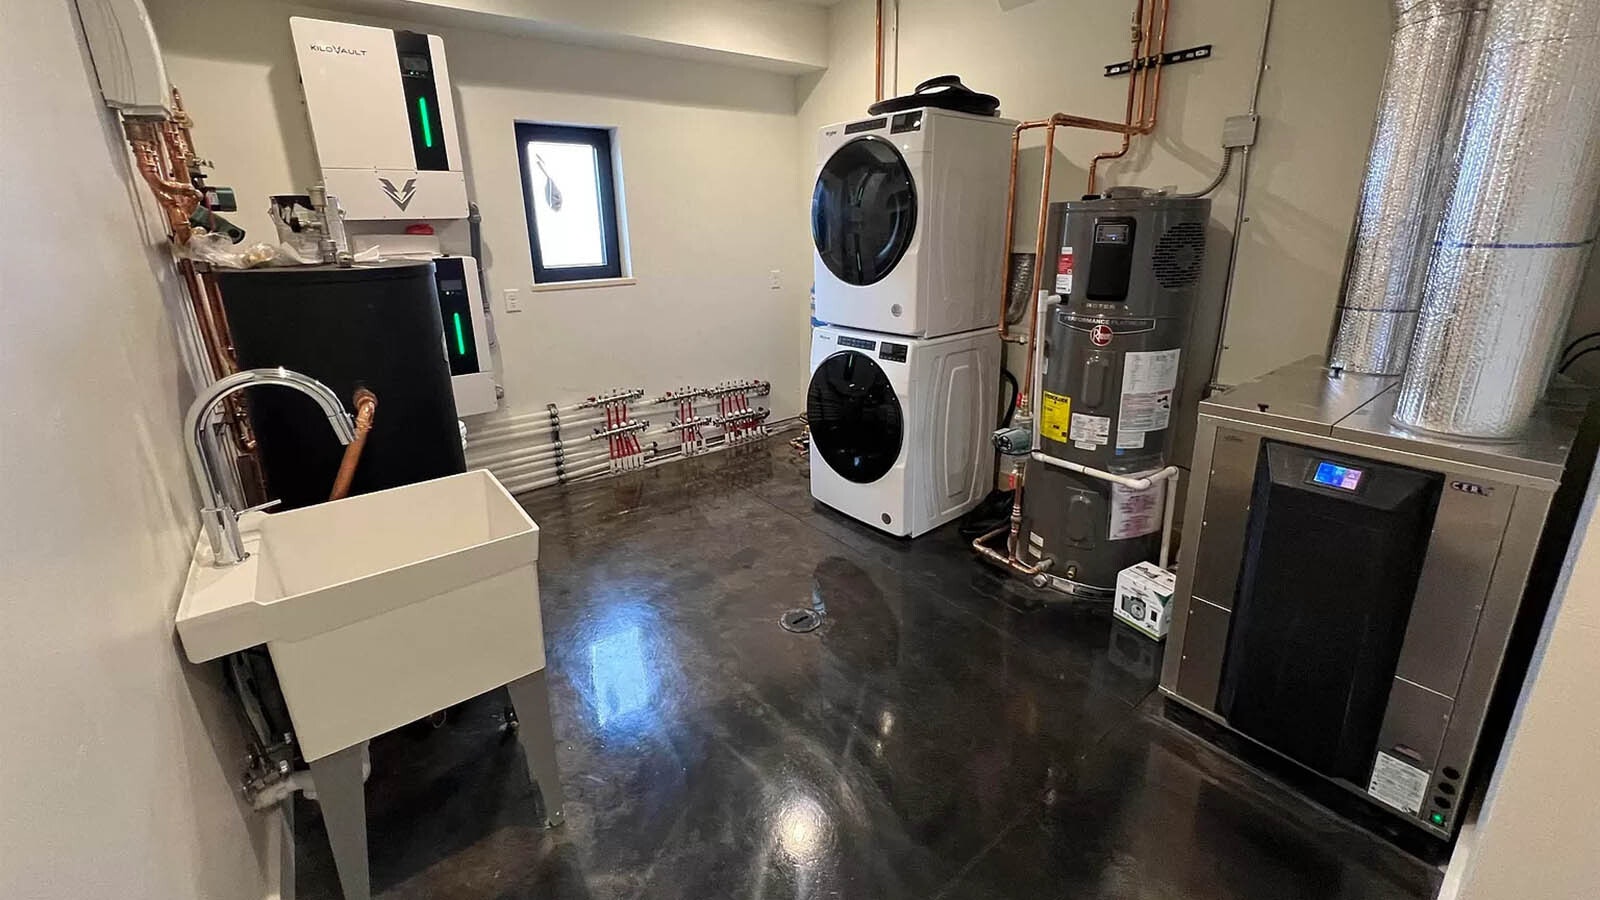 The control room of the house also serves as a laundry room.